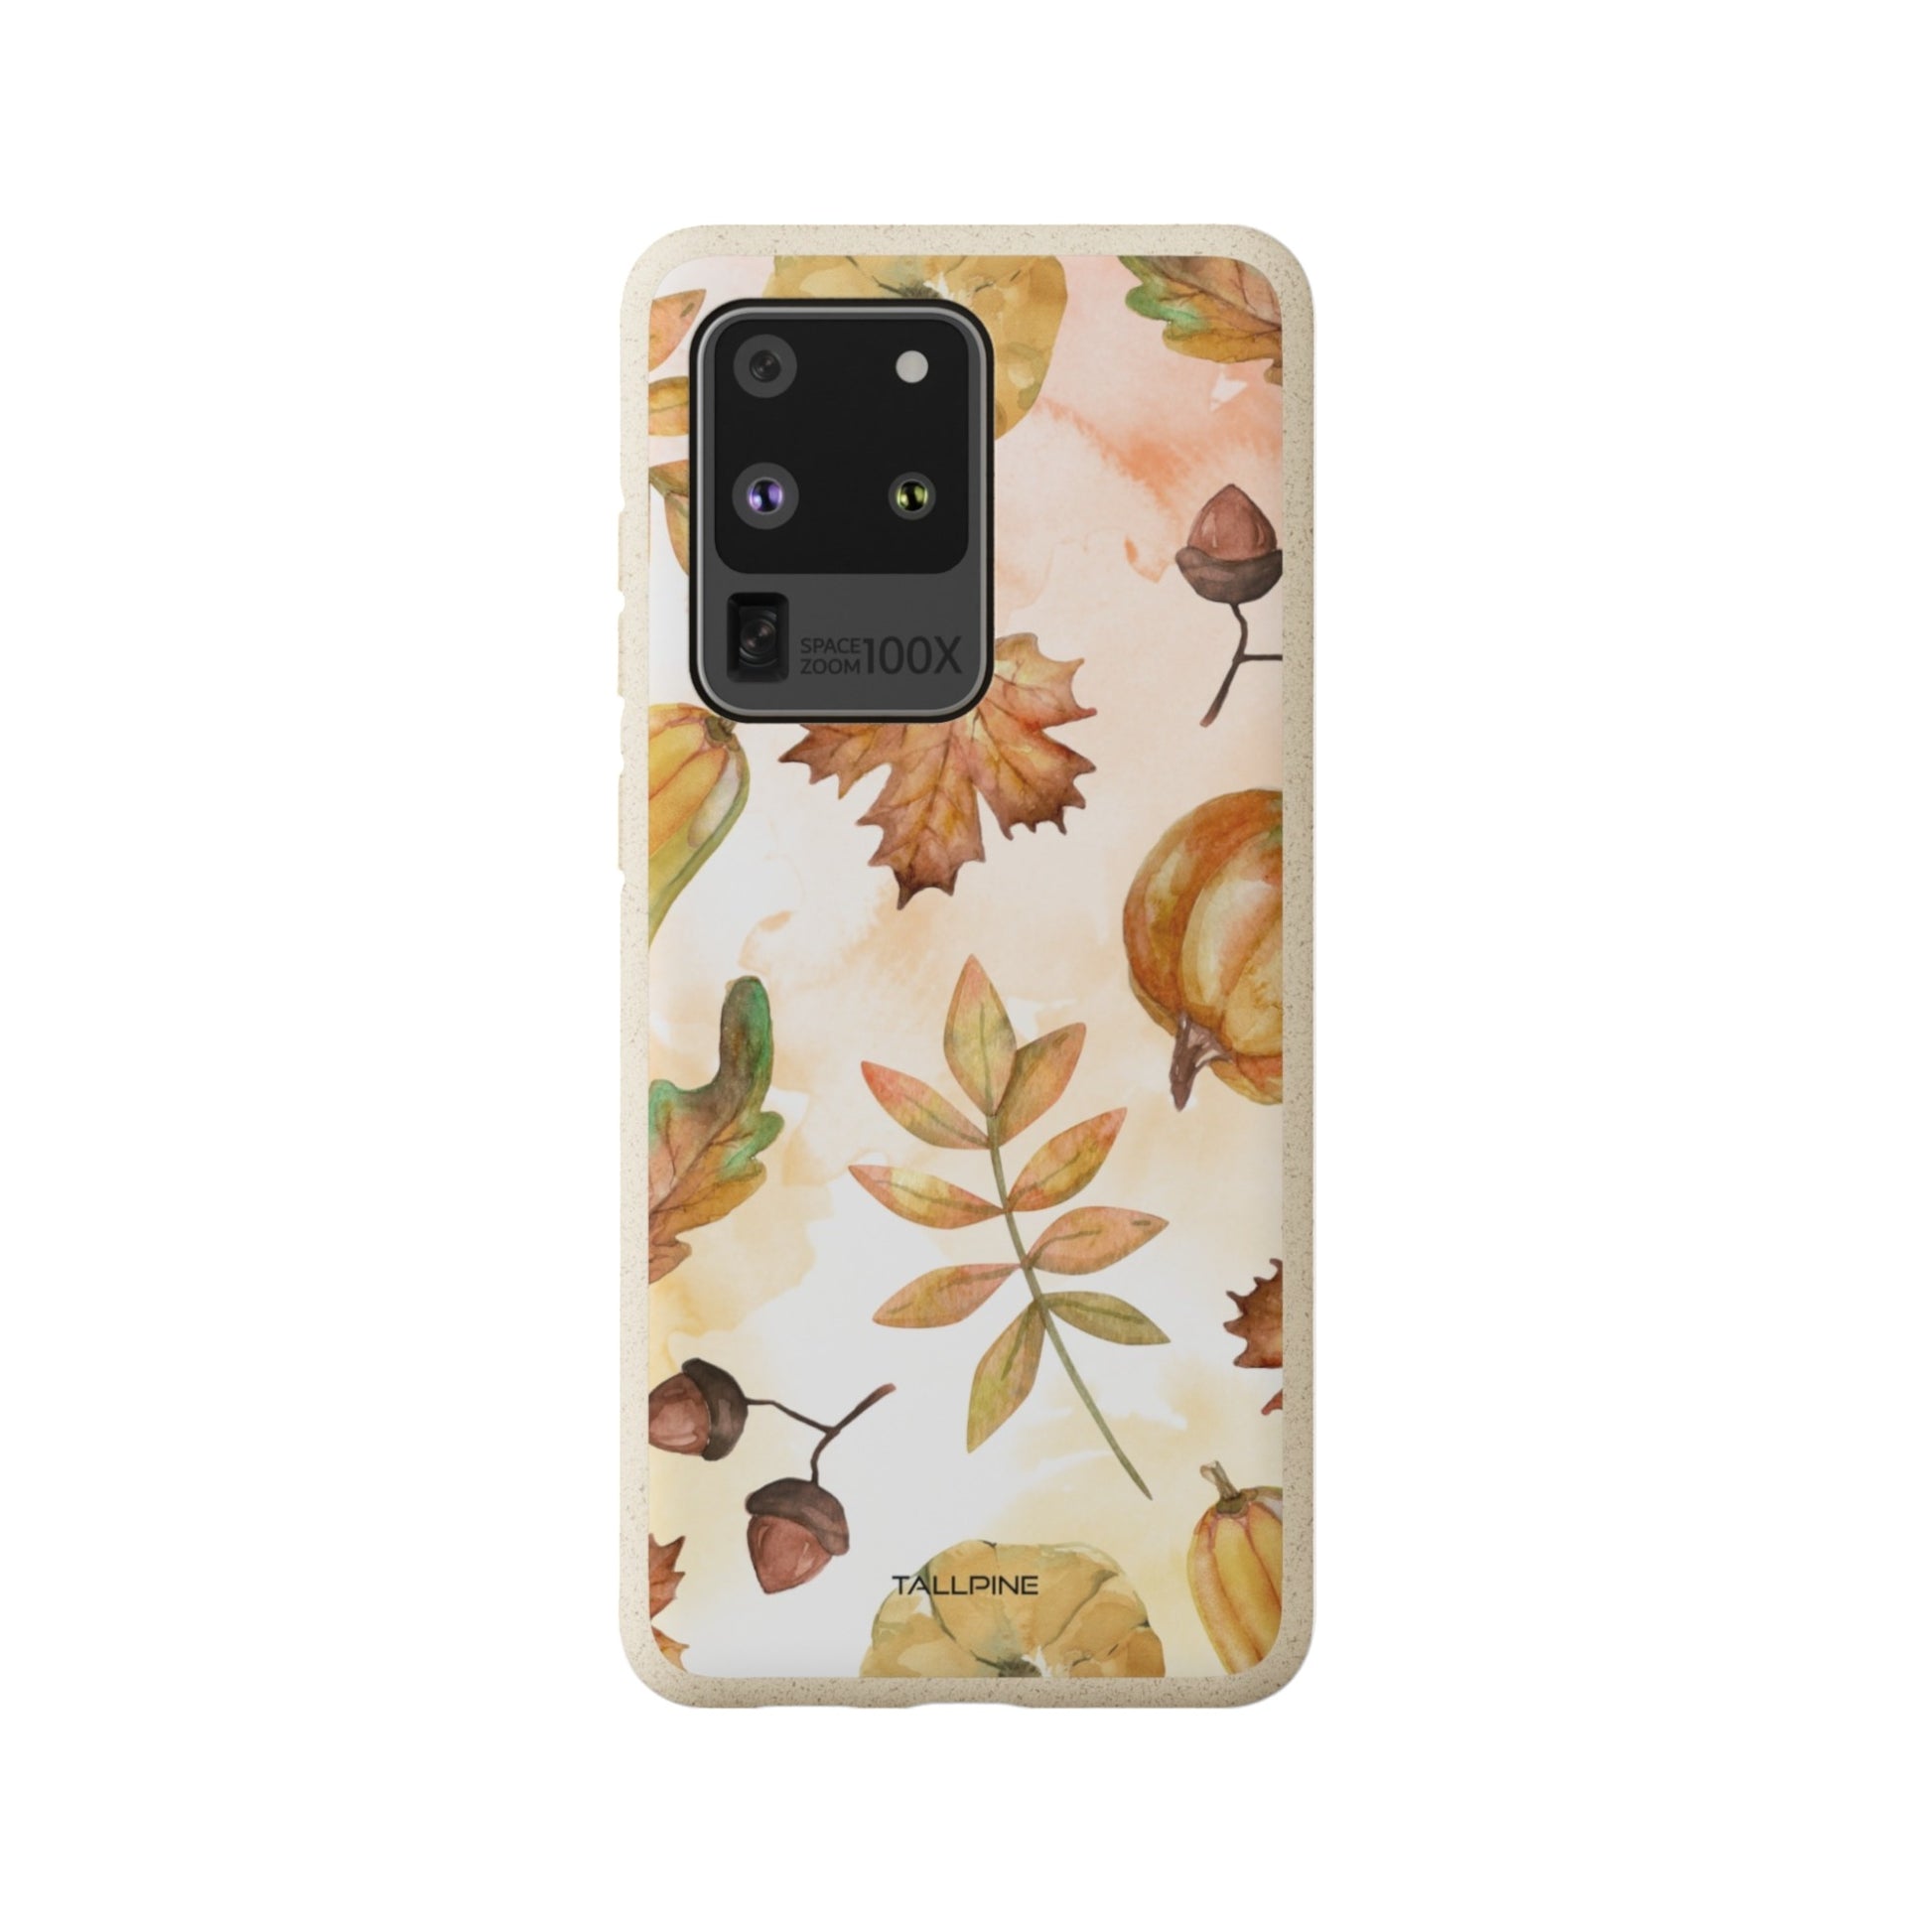 Autumn Harvest - Eco Case Samsung Galaxy S20 Ultra - Tallpine Cases | Sustainable and Eco-Friendly Phone Cases - autumn leaves nature New orange